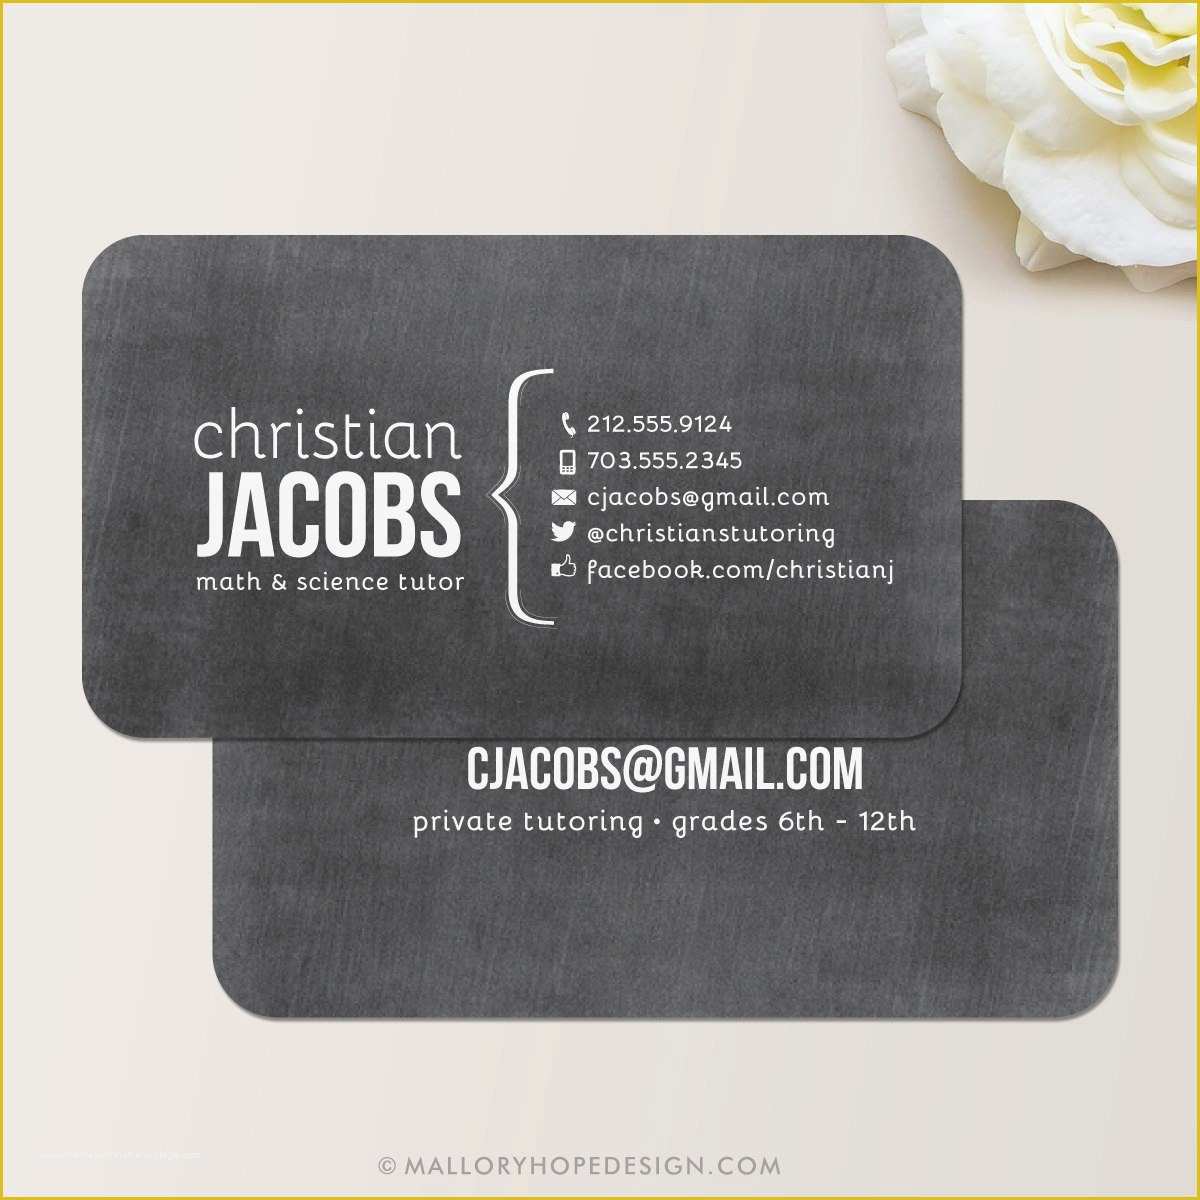 Christian Business Cards Templates Free Of Christian Business Cards Simple 28 Business Cards Free